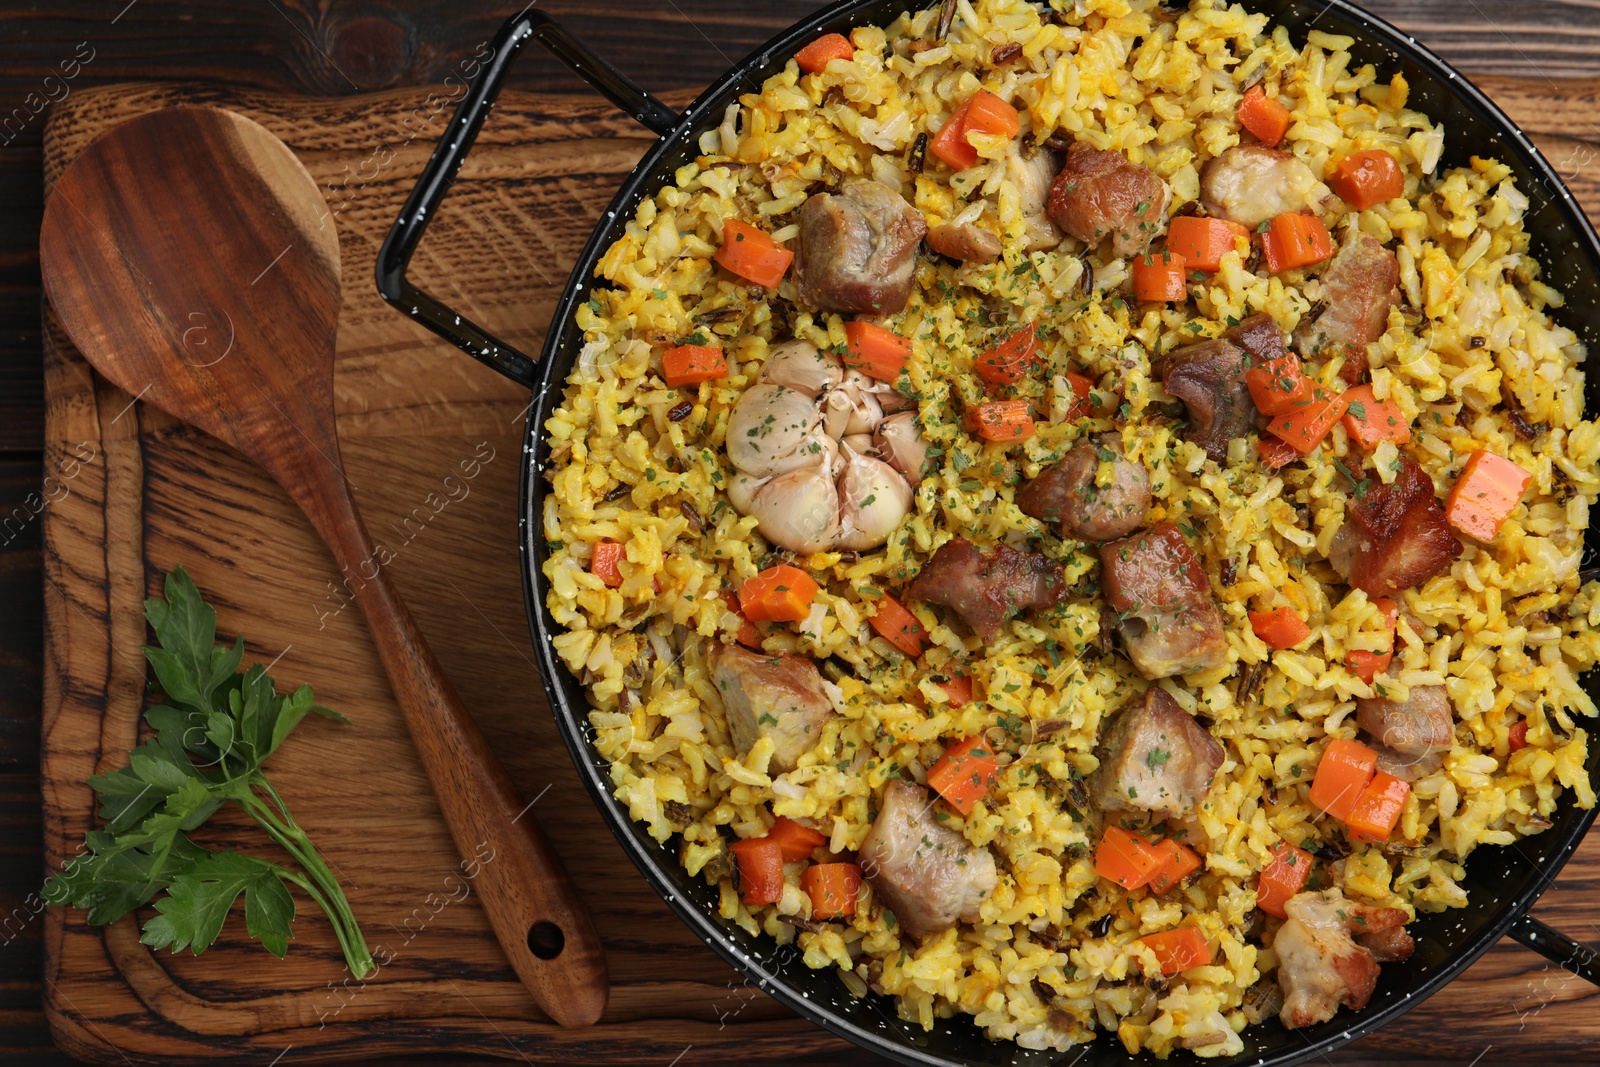 Photo of Delicious pilaf with meat, carrot and garlic served on wooden table, top view